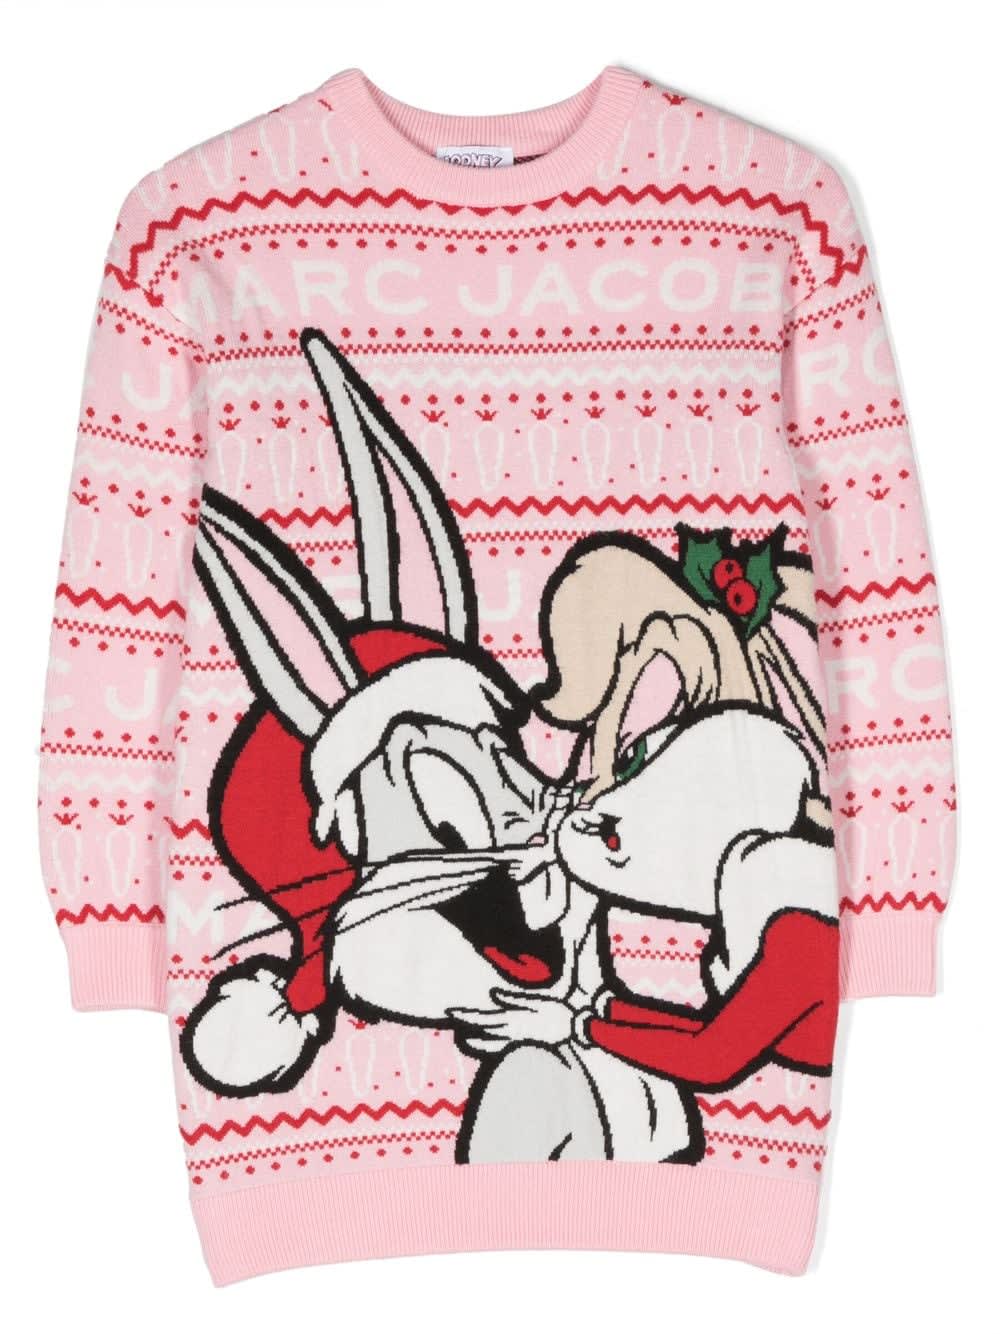 MARC JACOBS MARC JACOBS X LOONEY TUNES ABITO FUCSIA STAMPATO TEMA CHRISTMAS IN MAGLIA BAMBINA